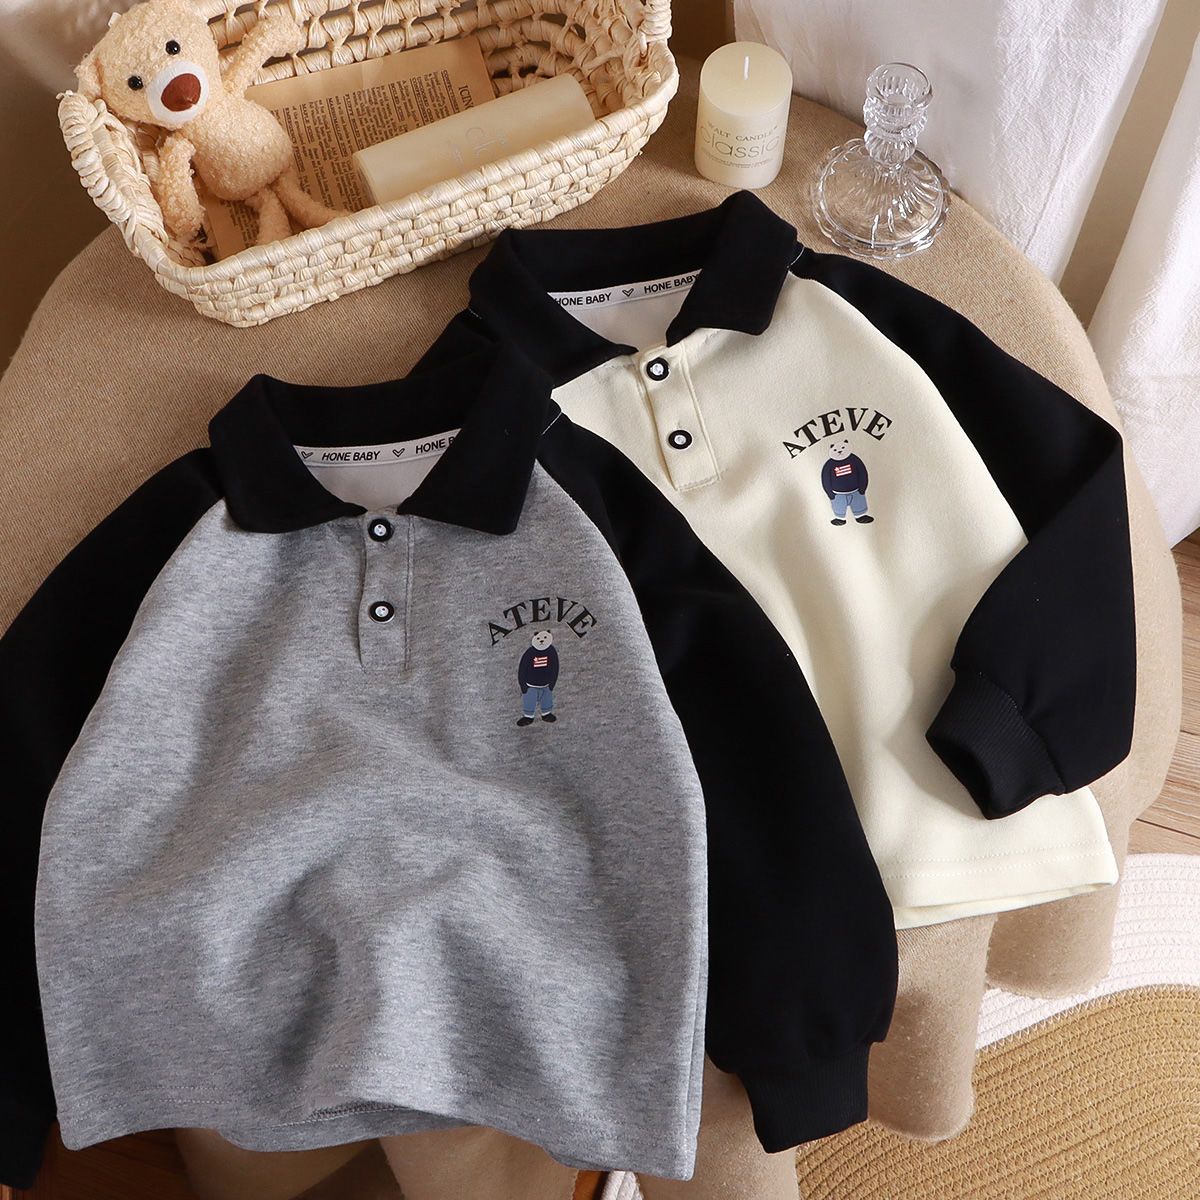 Spring and Autumn style long-sleeved sweatshirt POLO shirt, handsome, simple and spliced, trendy children's style tops, sweatshirts, children's men's